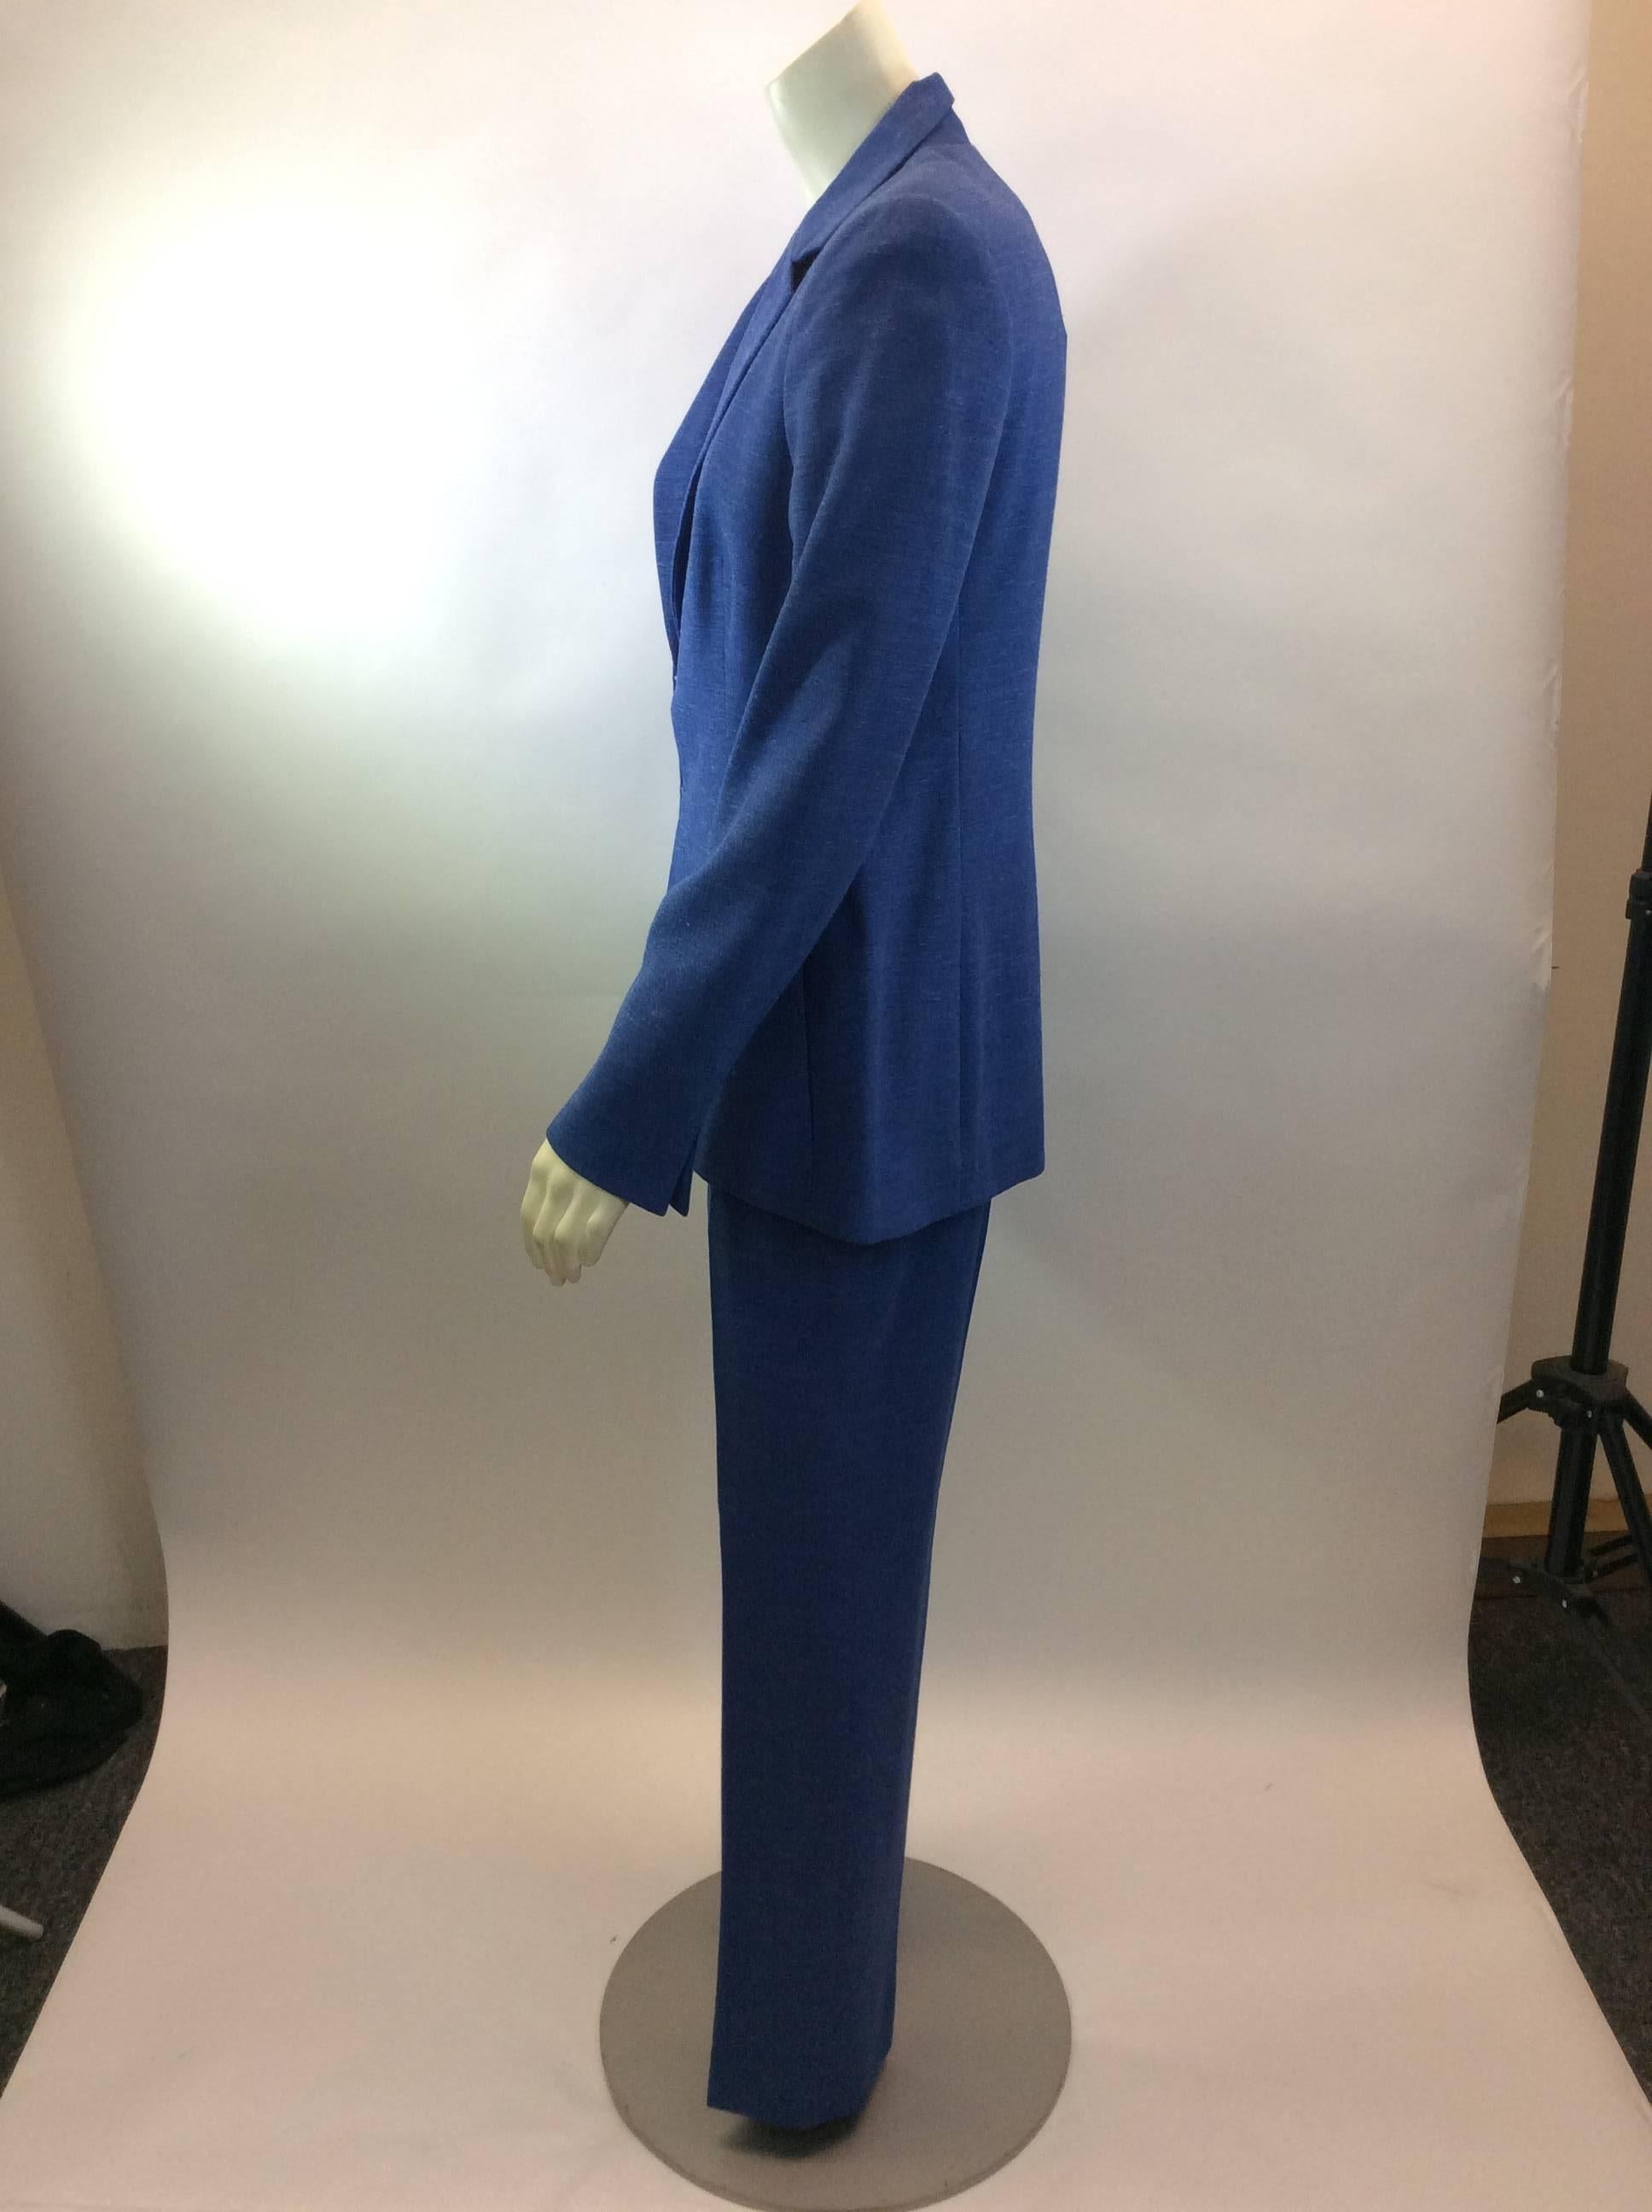 Akris Blue Wool Pant Suit
Size 6
Jacket:
Length 27
Bust 34
Waist 32
Pant:
Waist 30
Length 39
Inseam 29
60% wool
25% flax
10% Silk
5% Cashmere
Lining- 100% silk
$550
Made in Romania
